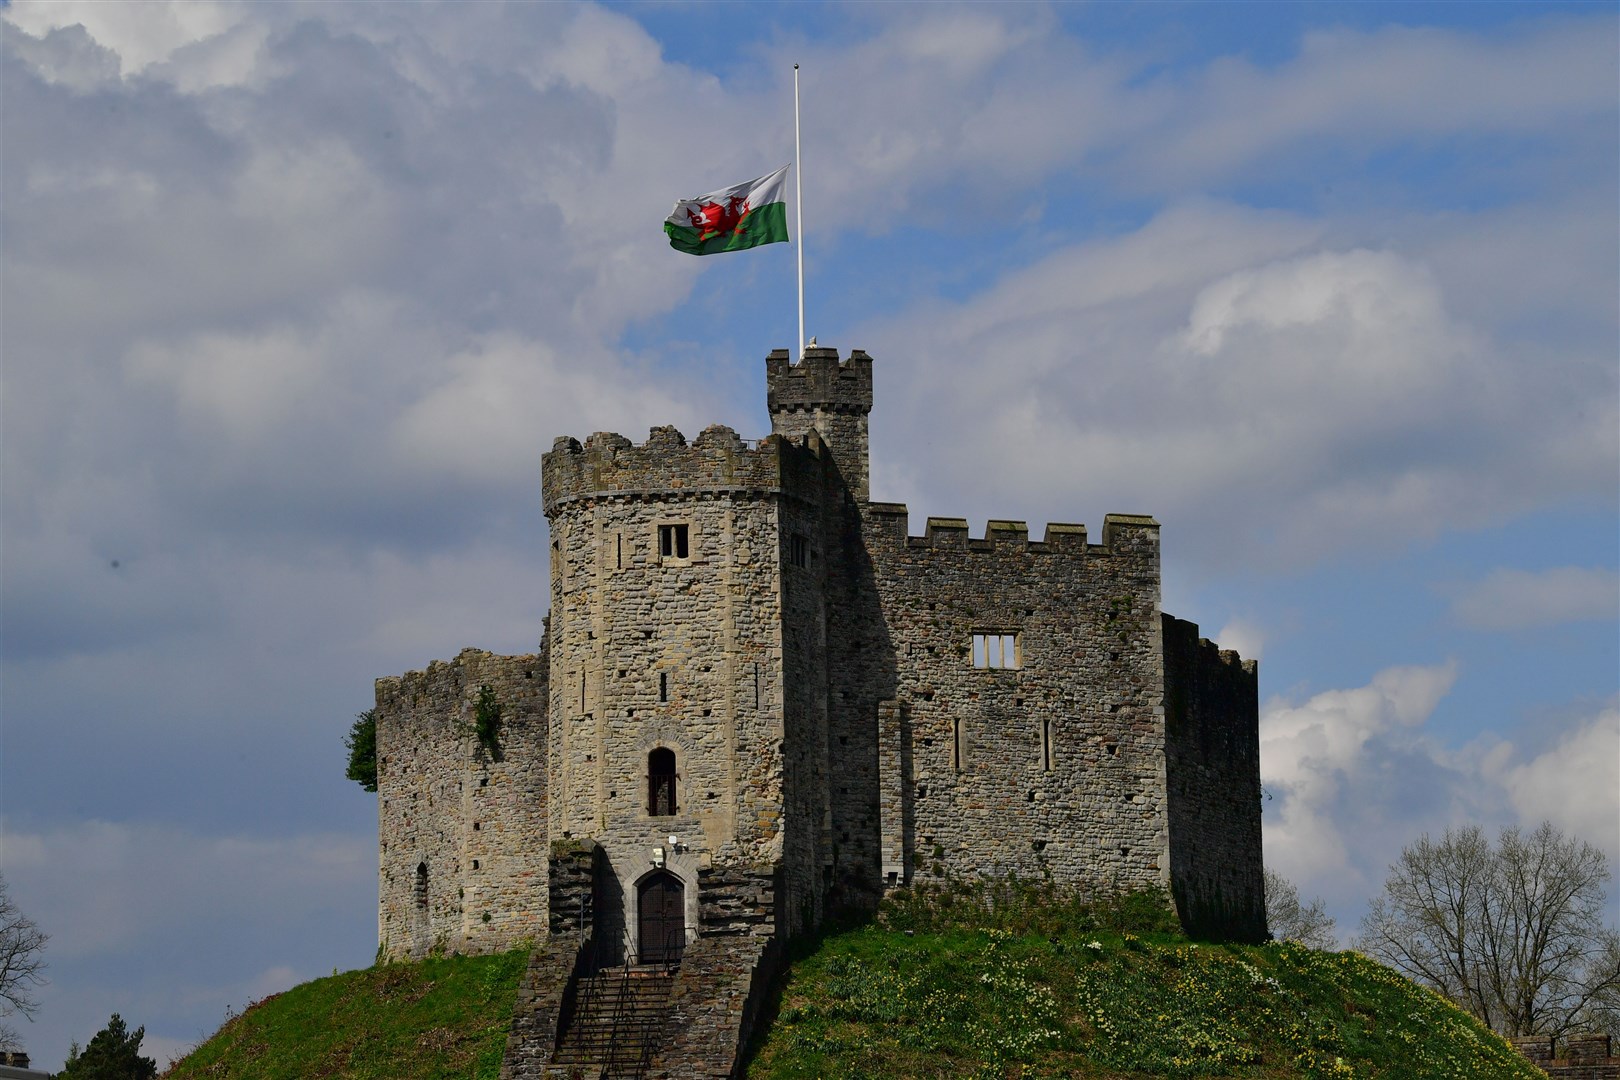 The Welsh flag which has been flying at half-mast since the death of the Queen, will be at full-mast during the ceremony (Ben Birchall/PA)